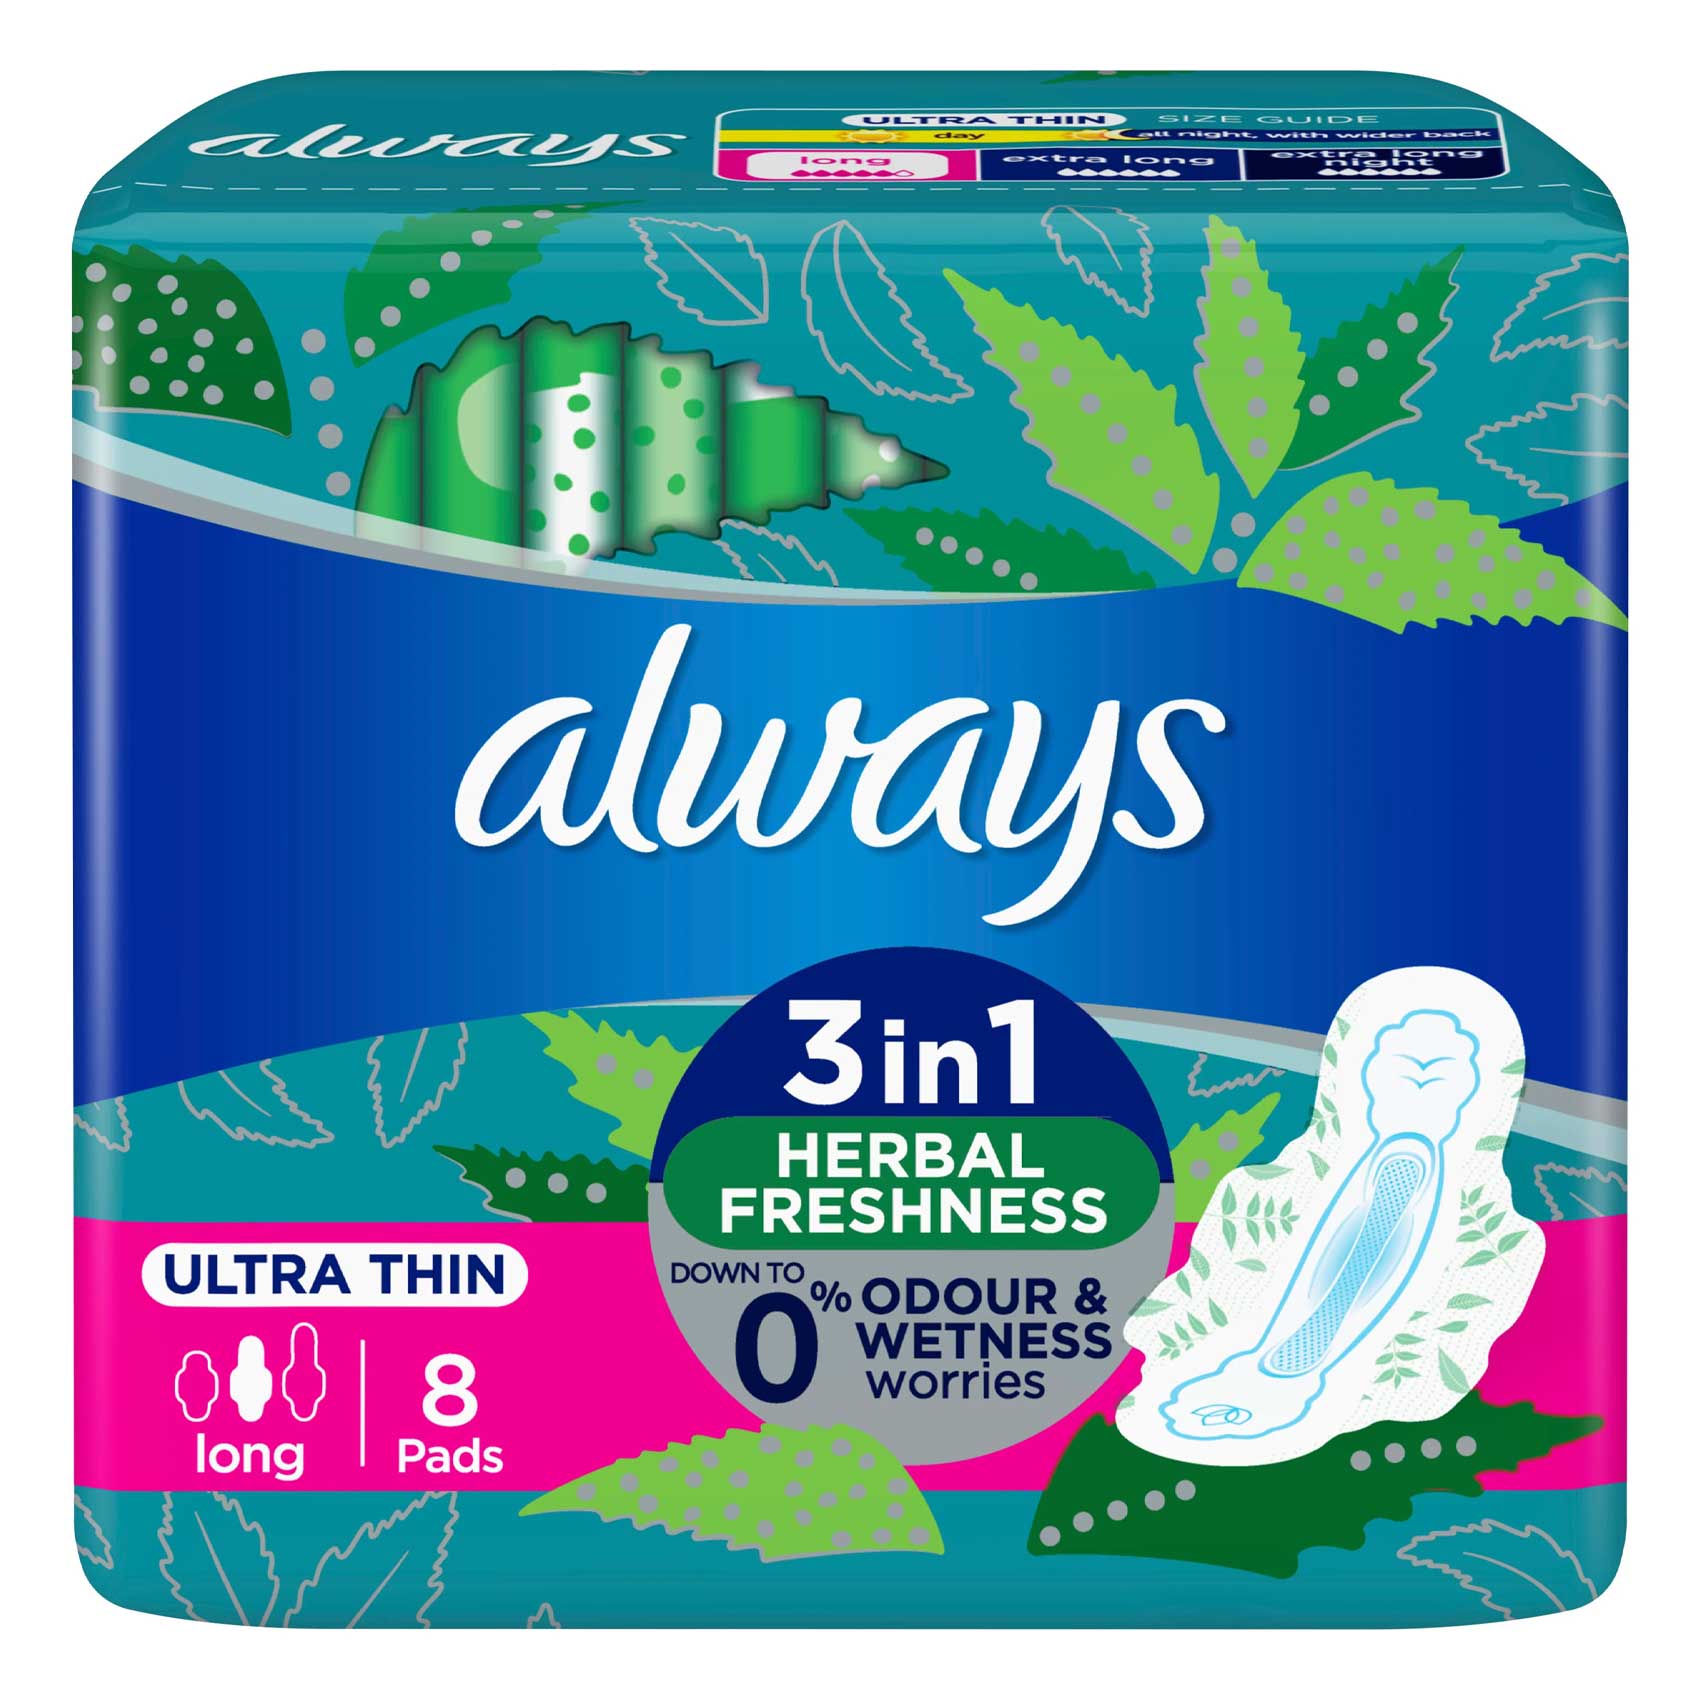 Always Ladies Pads 3 In 1 Herbal Freshness Ultra Thin Long 8 Pads